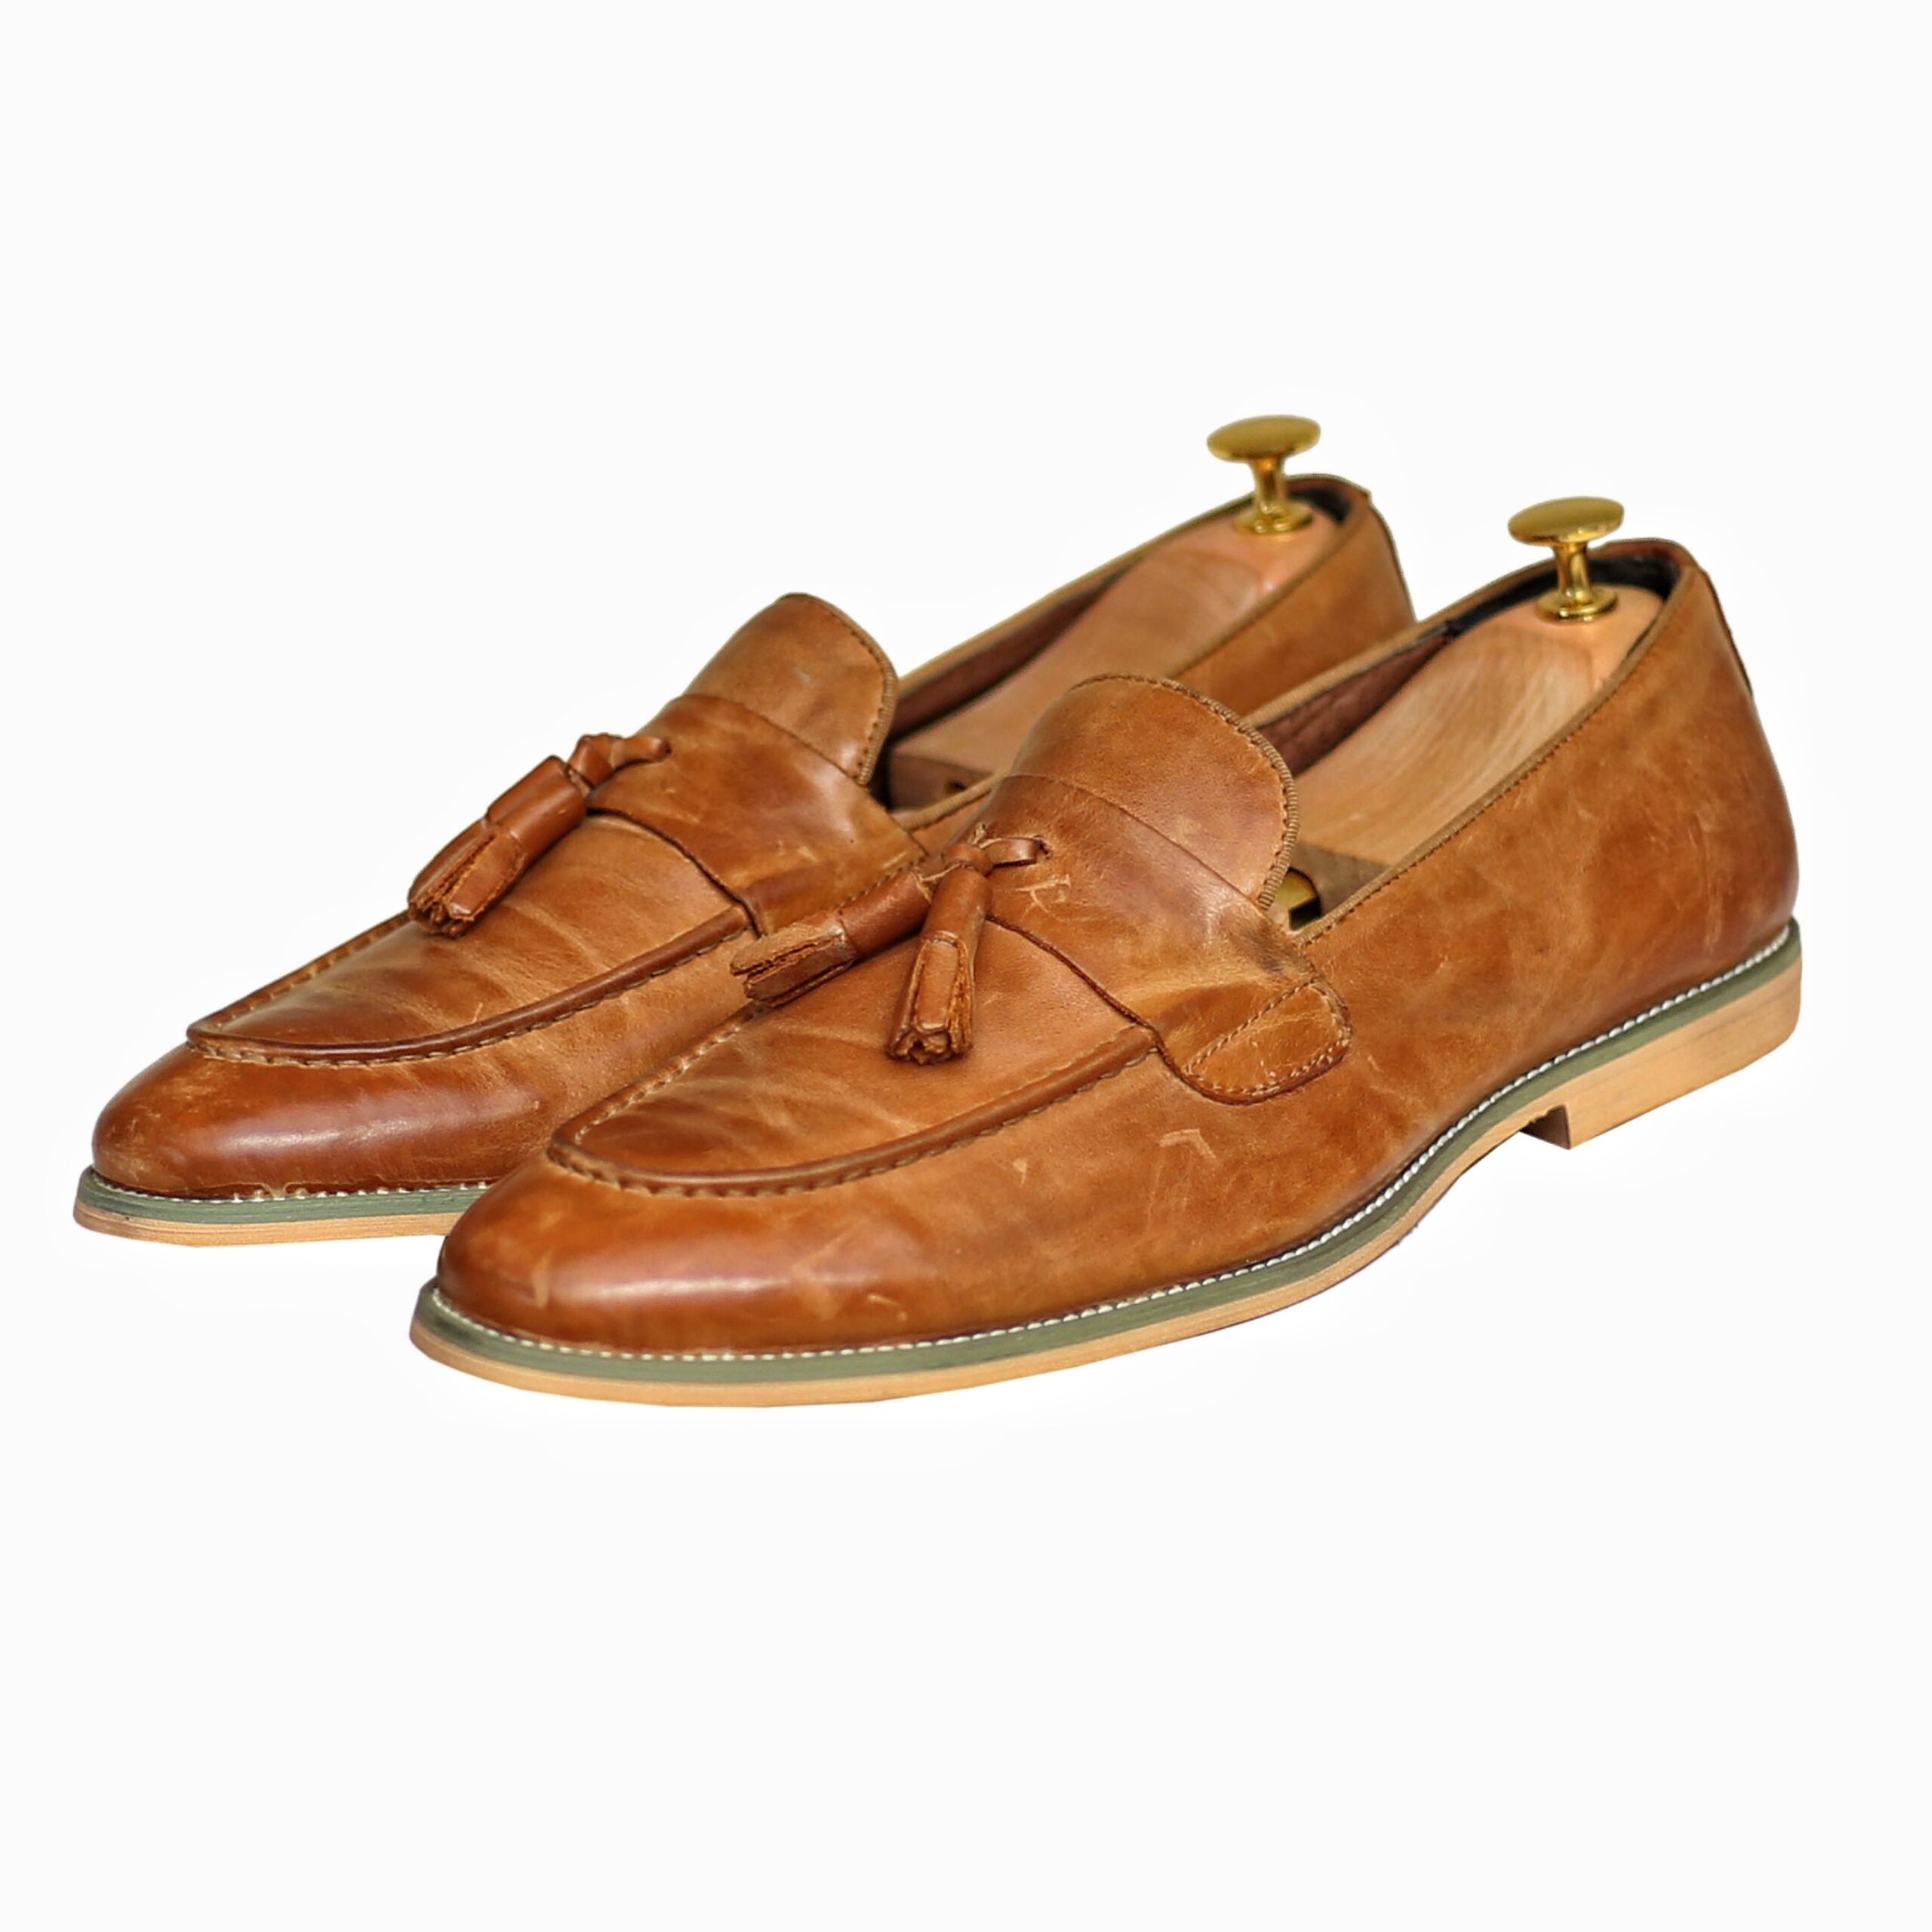 Men's Loafer Shoes - Slip On Shoes. Shoes with no laces